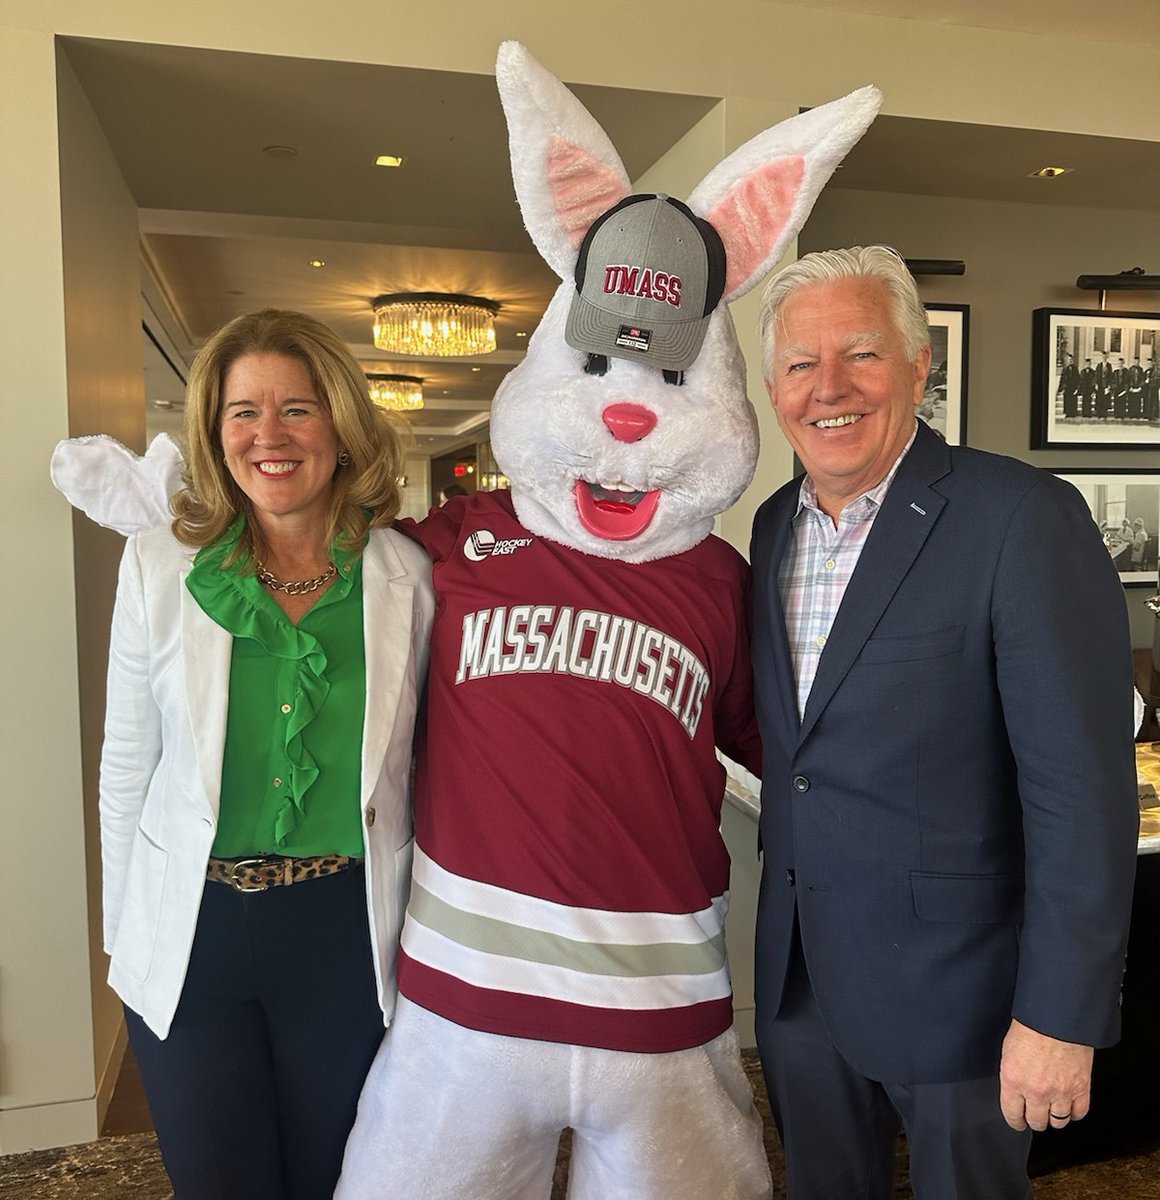 Jen and I wish all who celebrate a happy Easter. #UMassClub